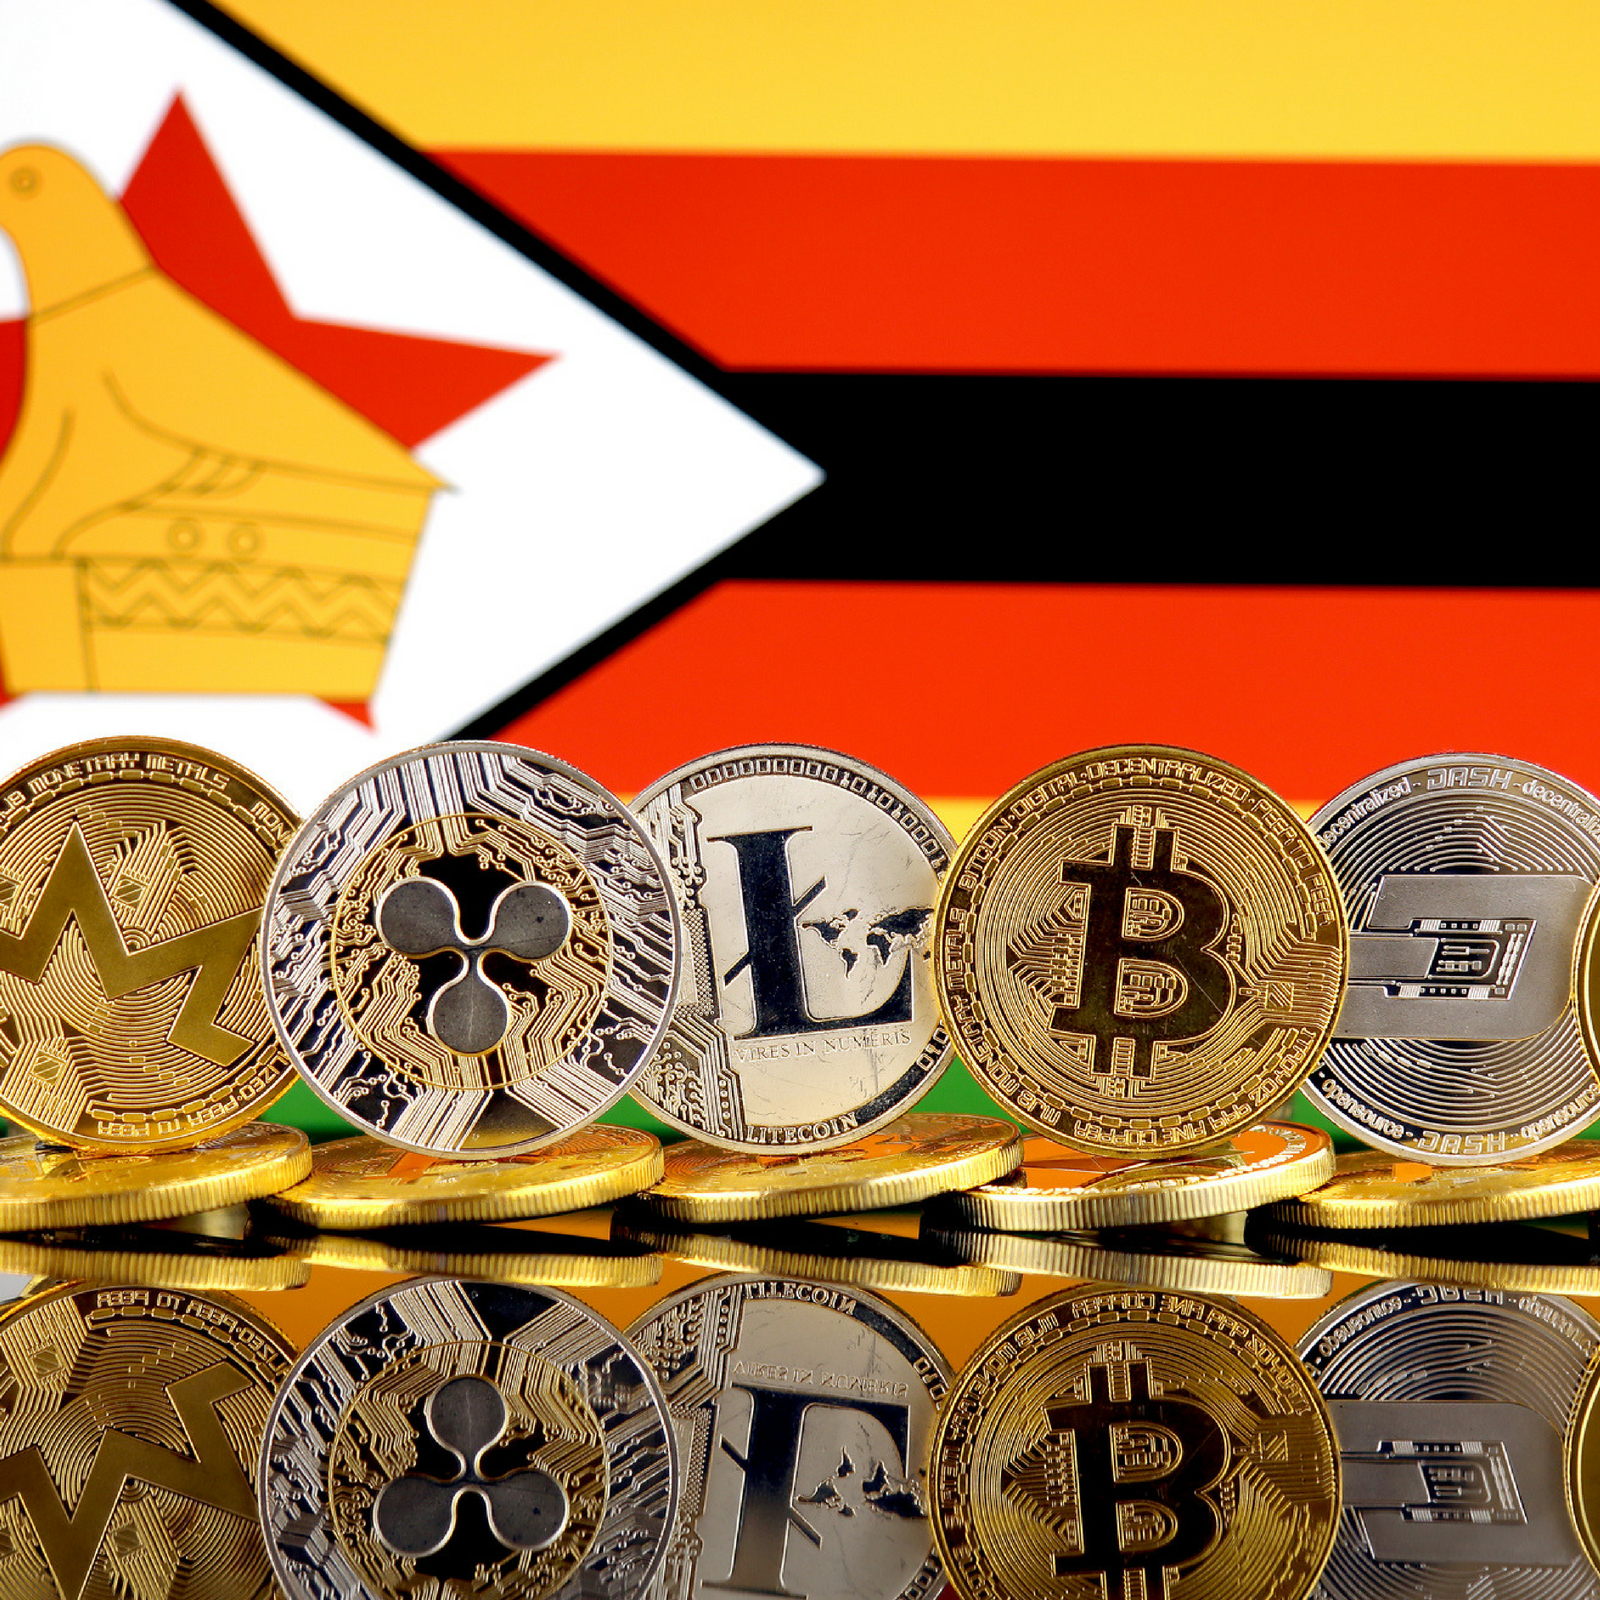 Zimbabwe Bans All Cryptocurrency Activity, Businesses Have 2 Month Grace Period